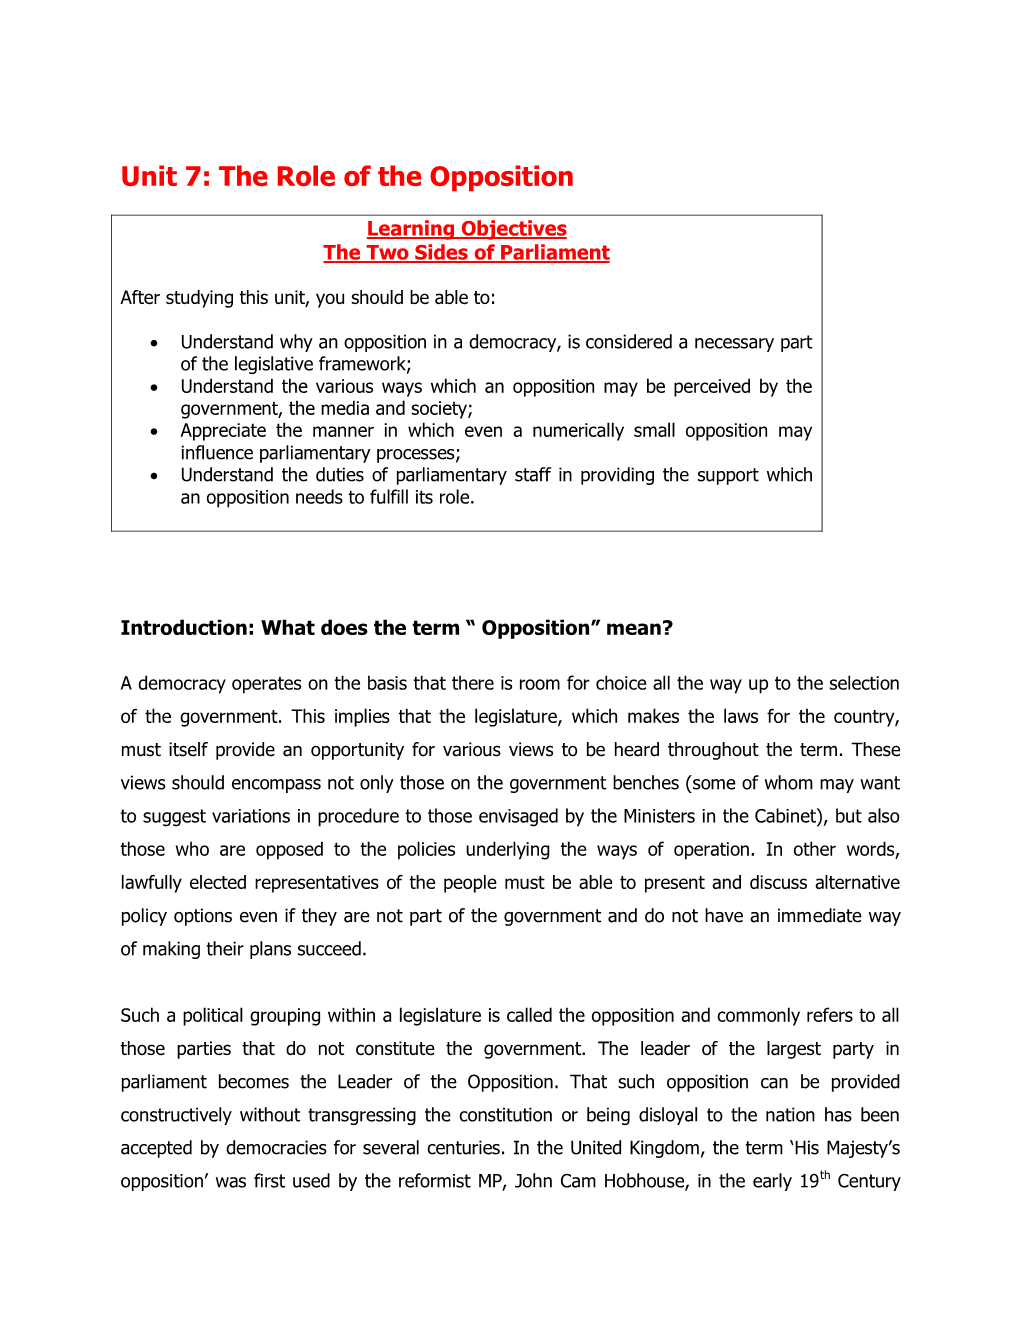 Unit 7: the Role of the Opposition